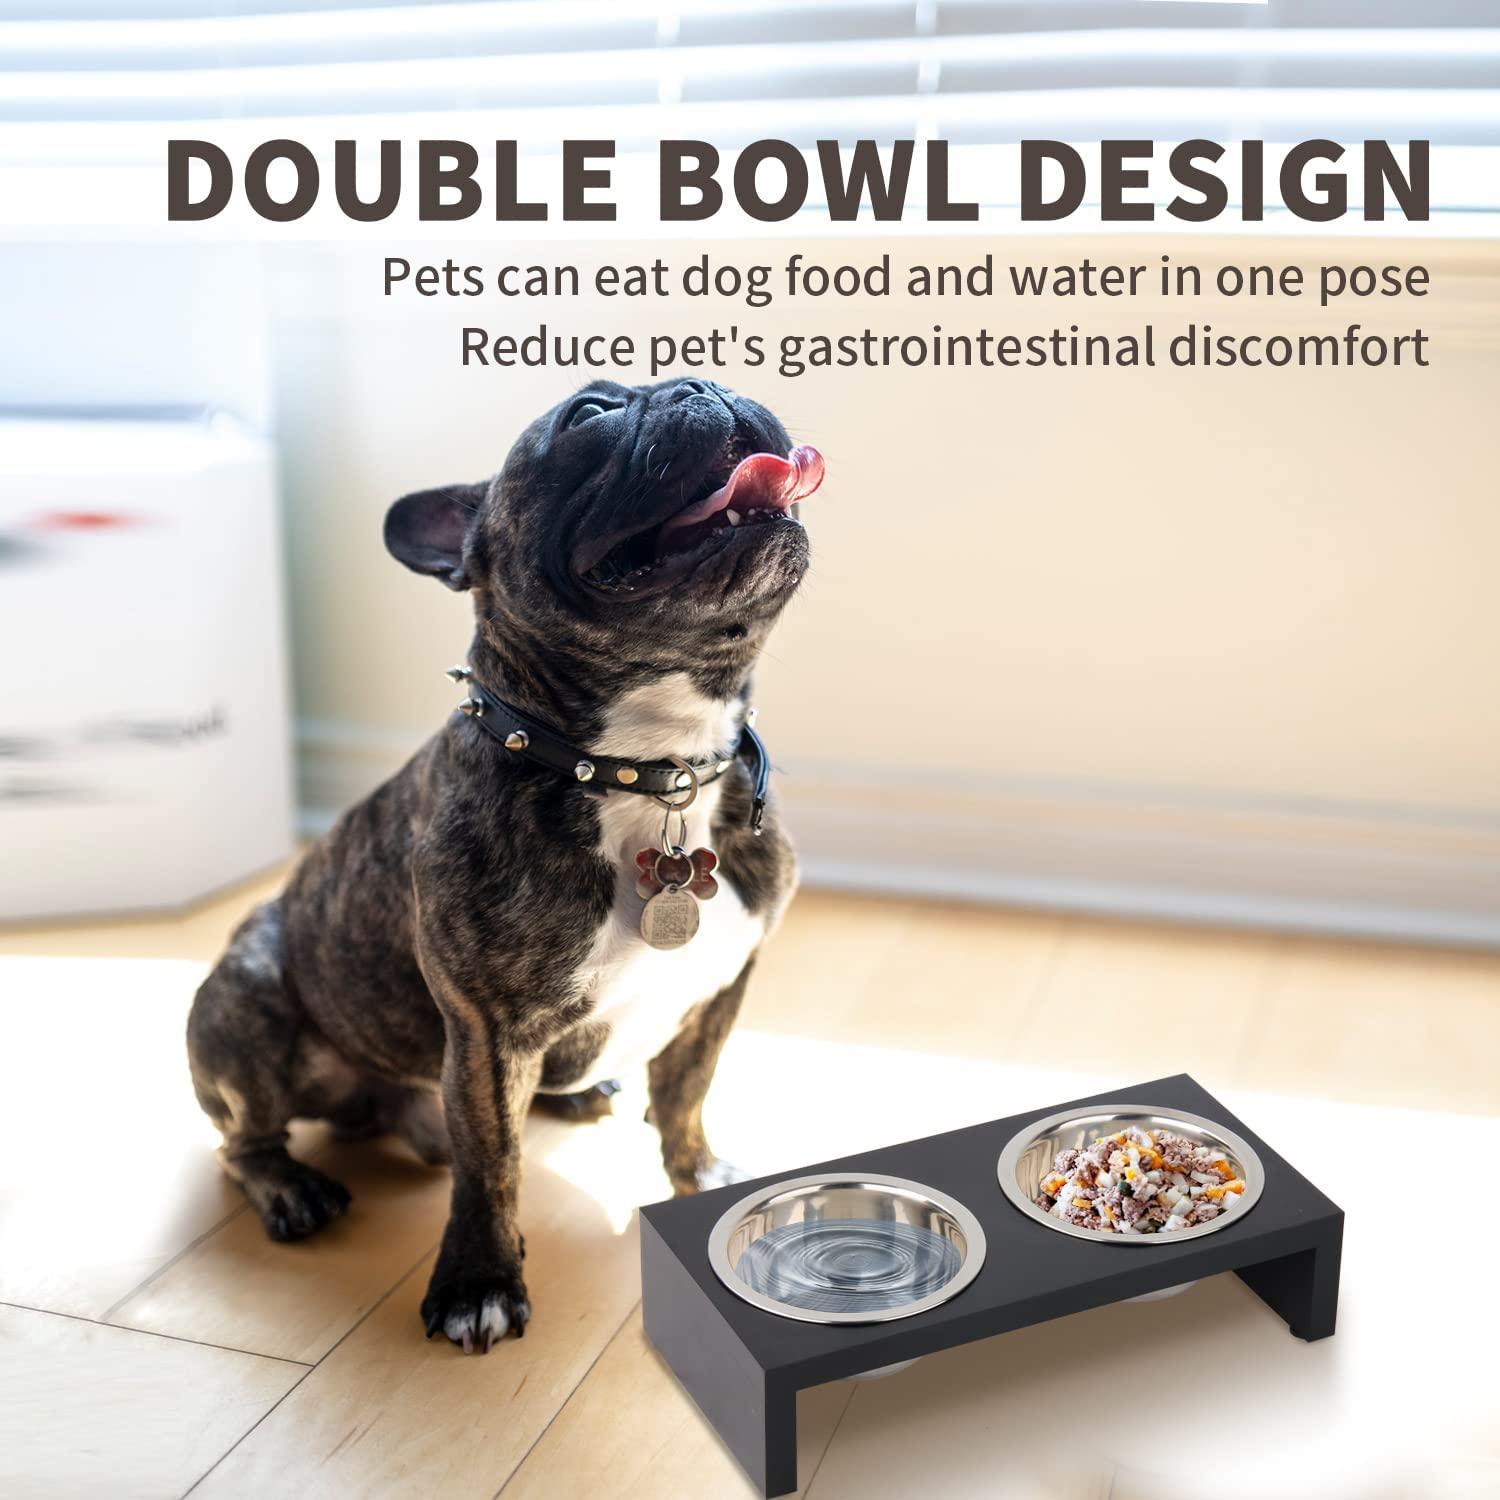 PAWISE Elevated Dog Bowls, Raised Cat Feeder Elevated Food and Water Bowls  Stand with 2 Stainless Steel Bowls and Anti Slip Feet, Wooden Frame Pet  Feeder L-750ml